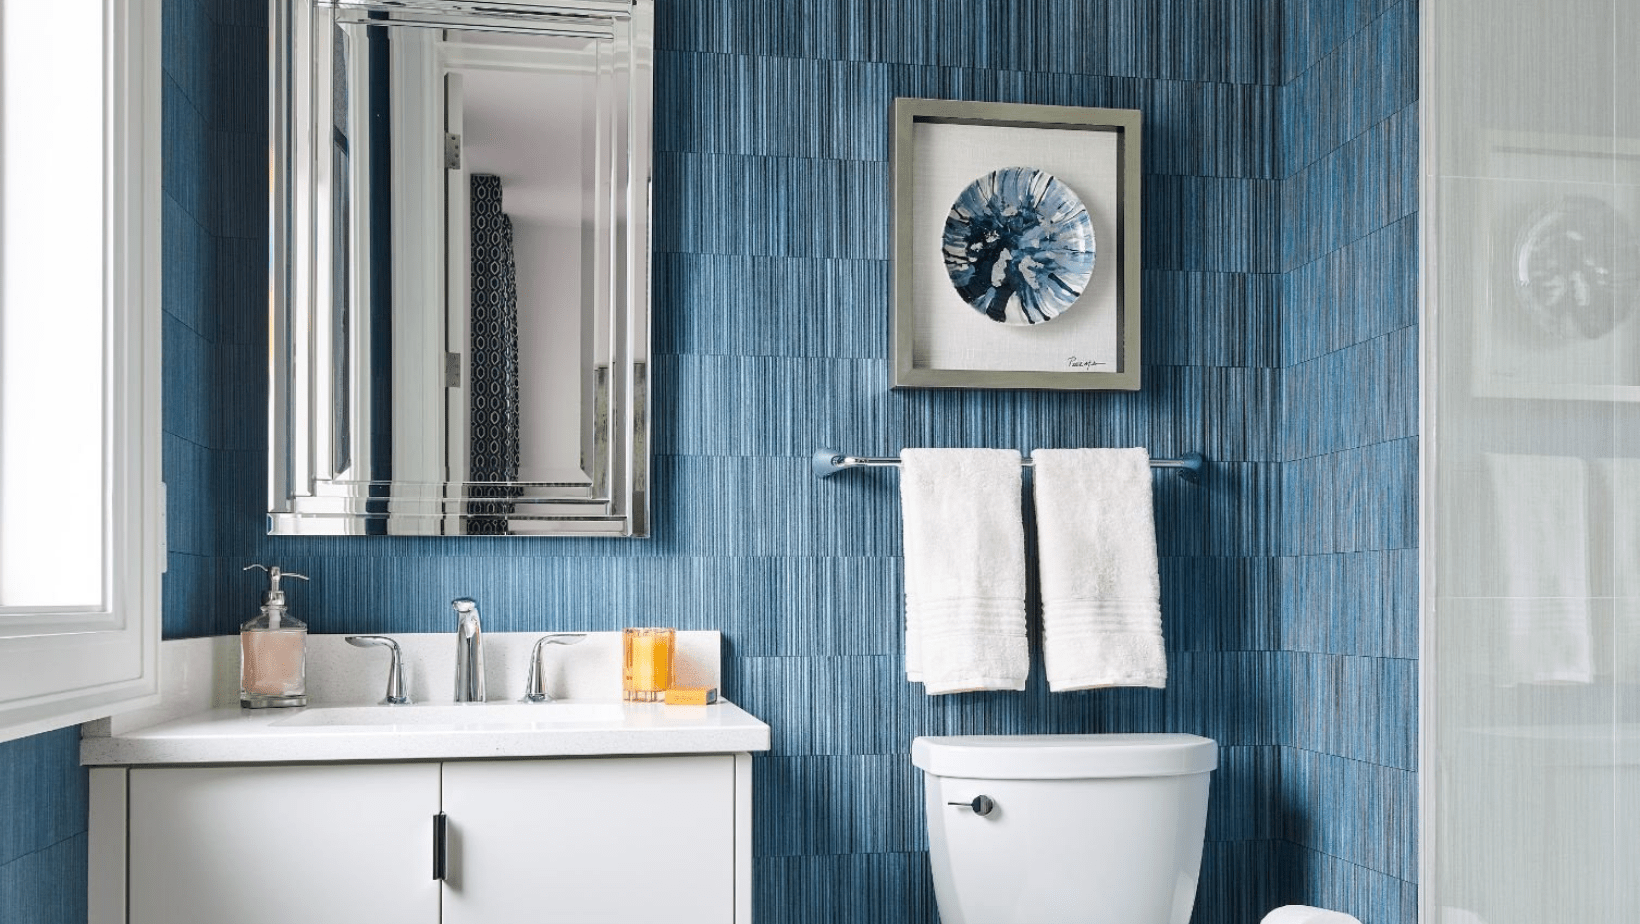 Tips for keeping a small bathroom organized